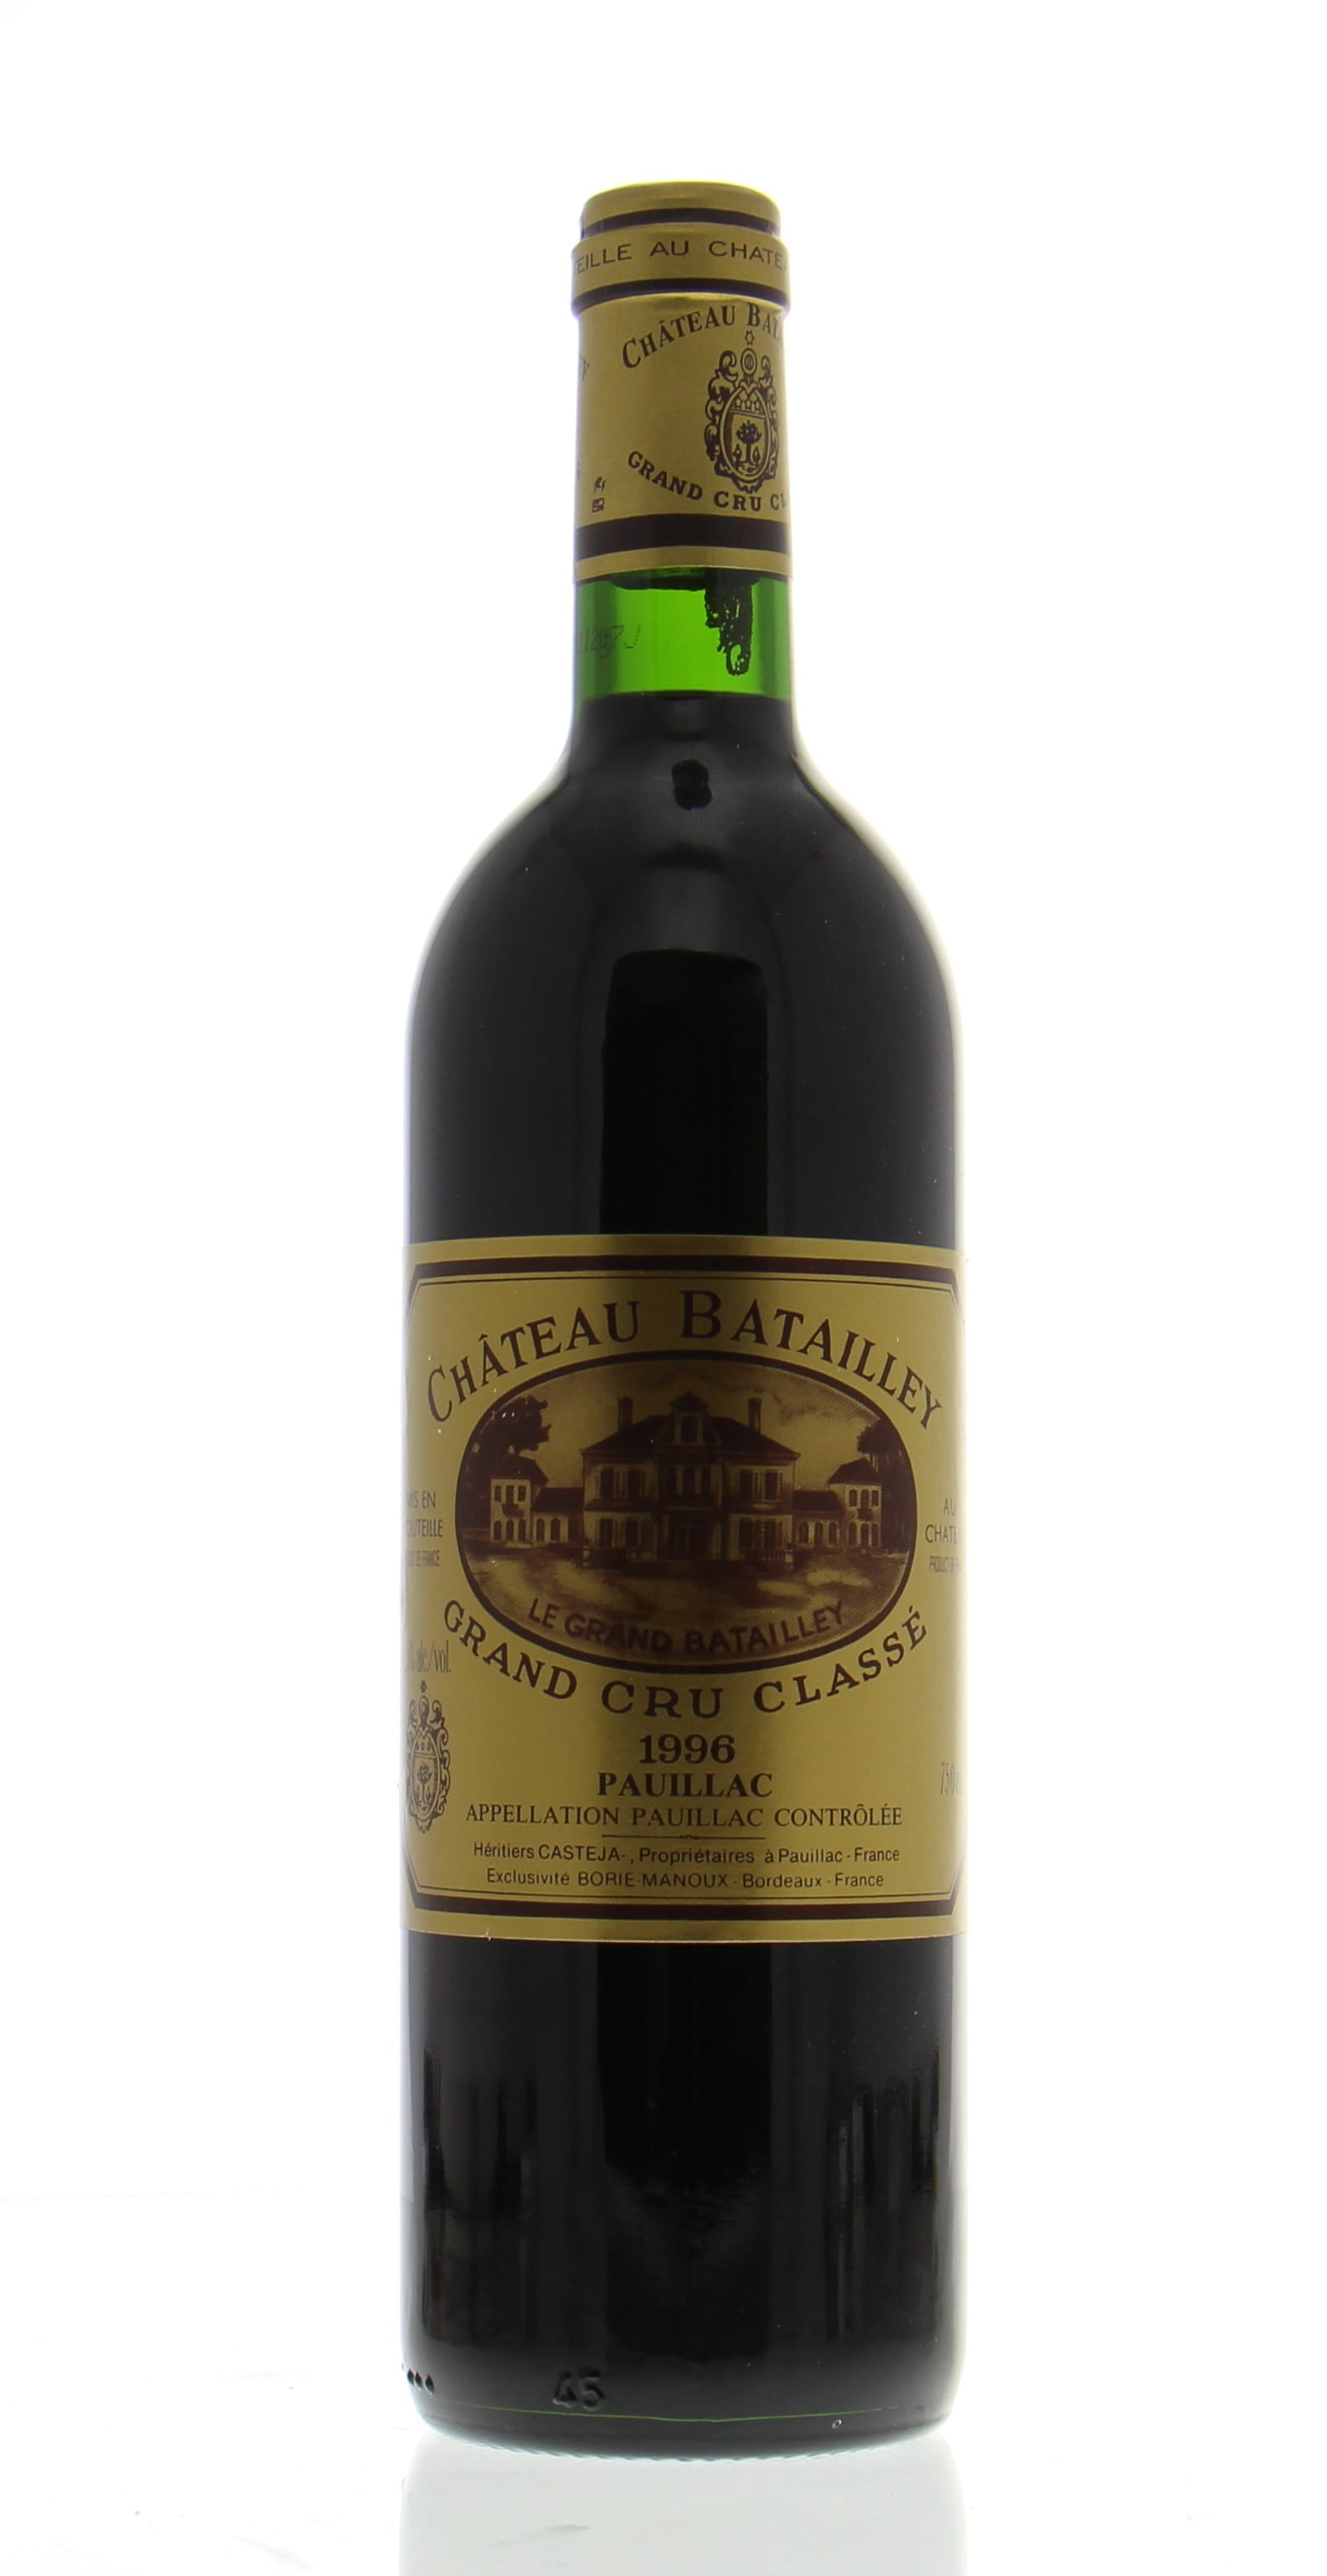 Chateau Batailley - Chateau Batailley 1996 Perfect